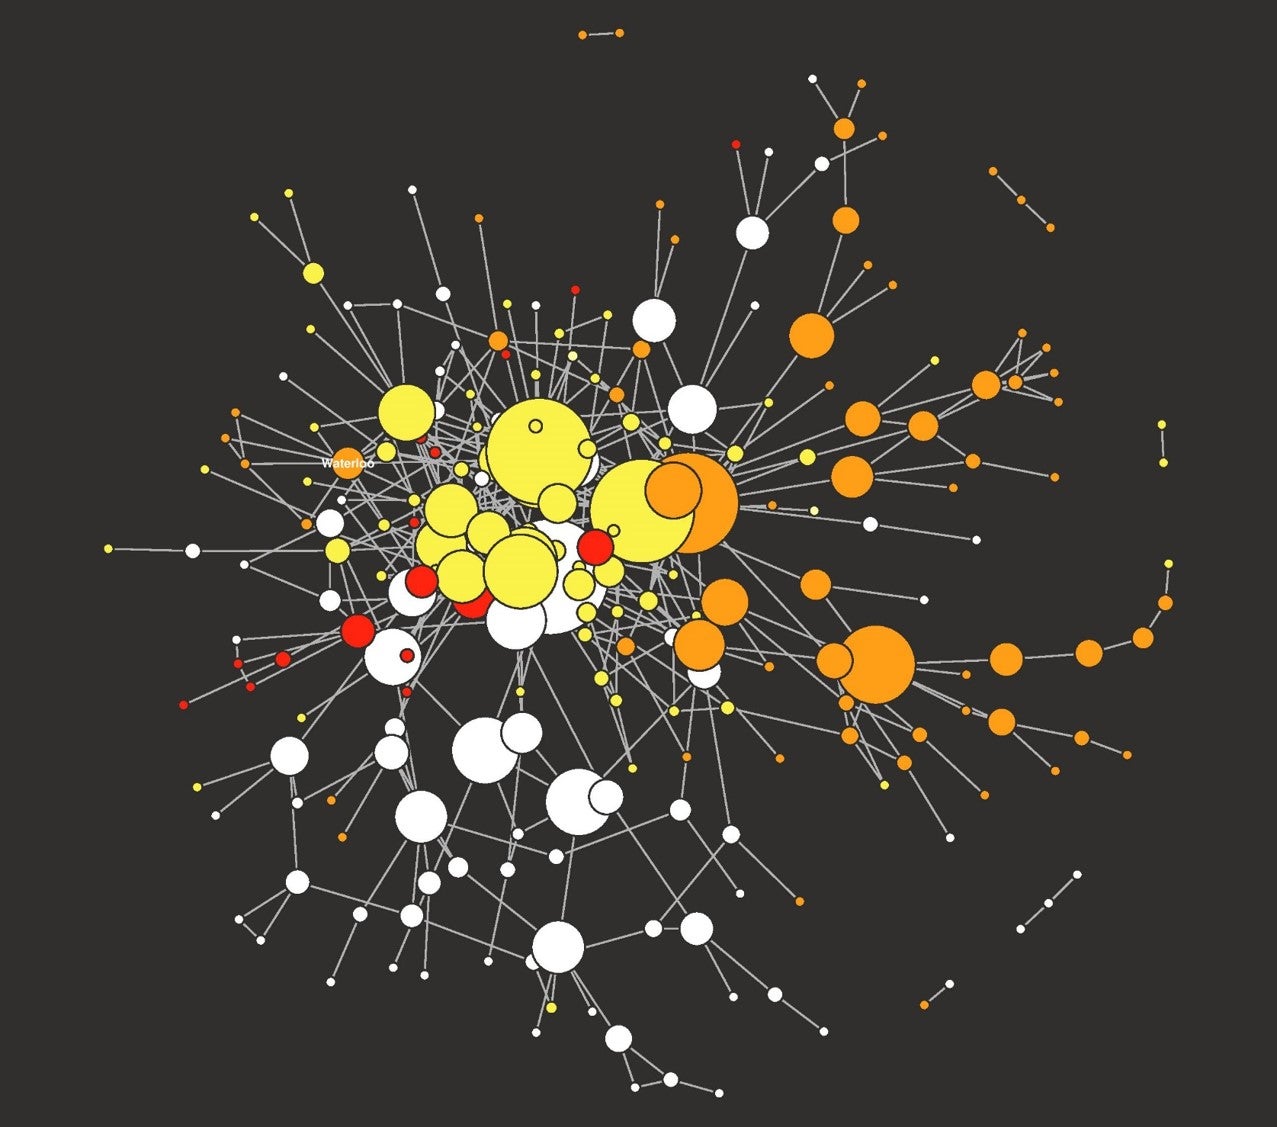 visualization of the collaboration network